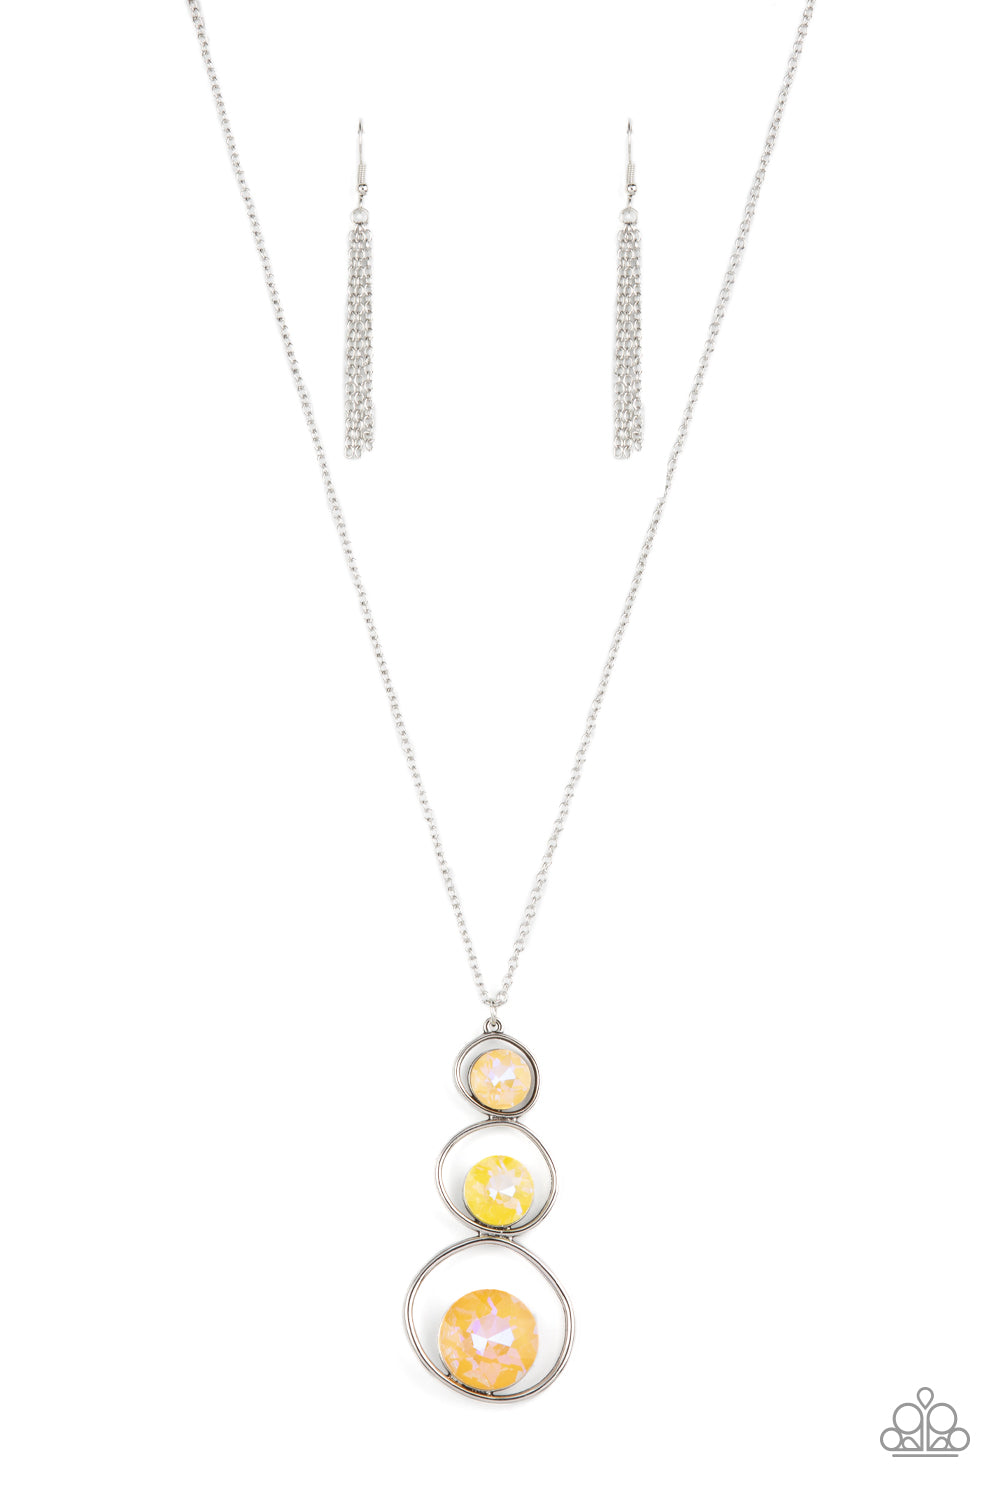 Celestial Courtier - Yellow Iridescent Ombre Gem Pendant Paparazzi Necklace & matching earrings